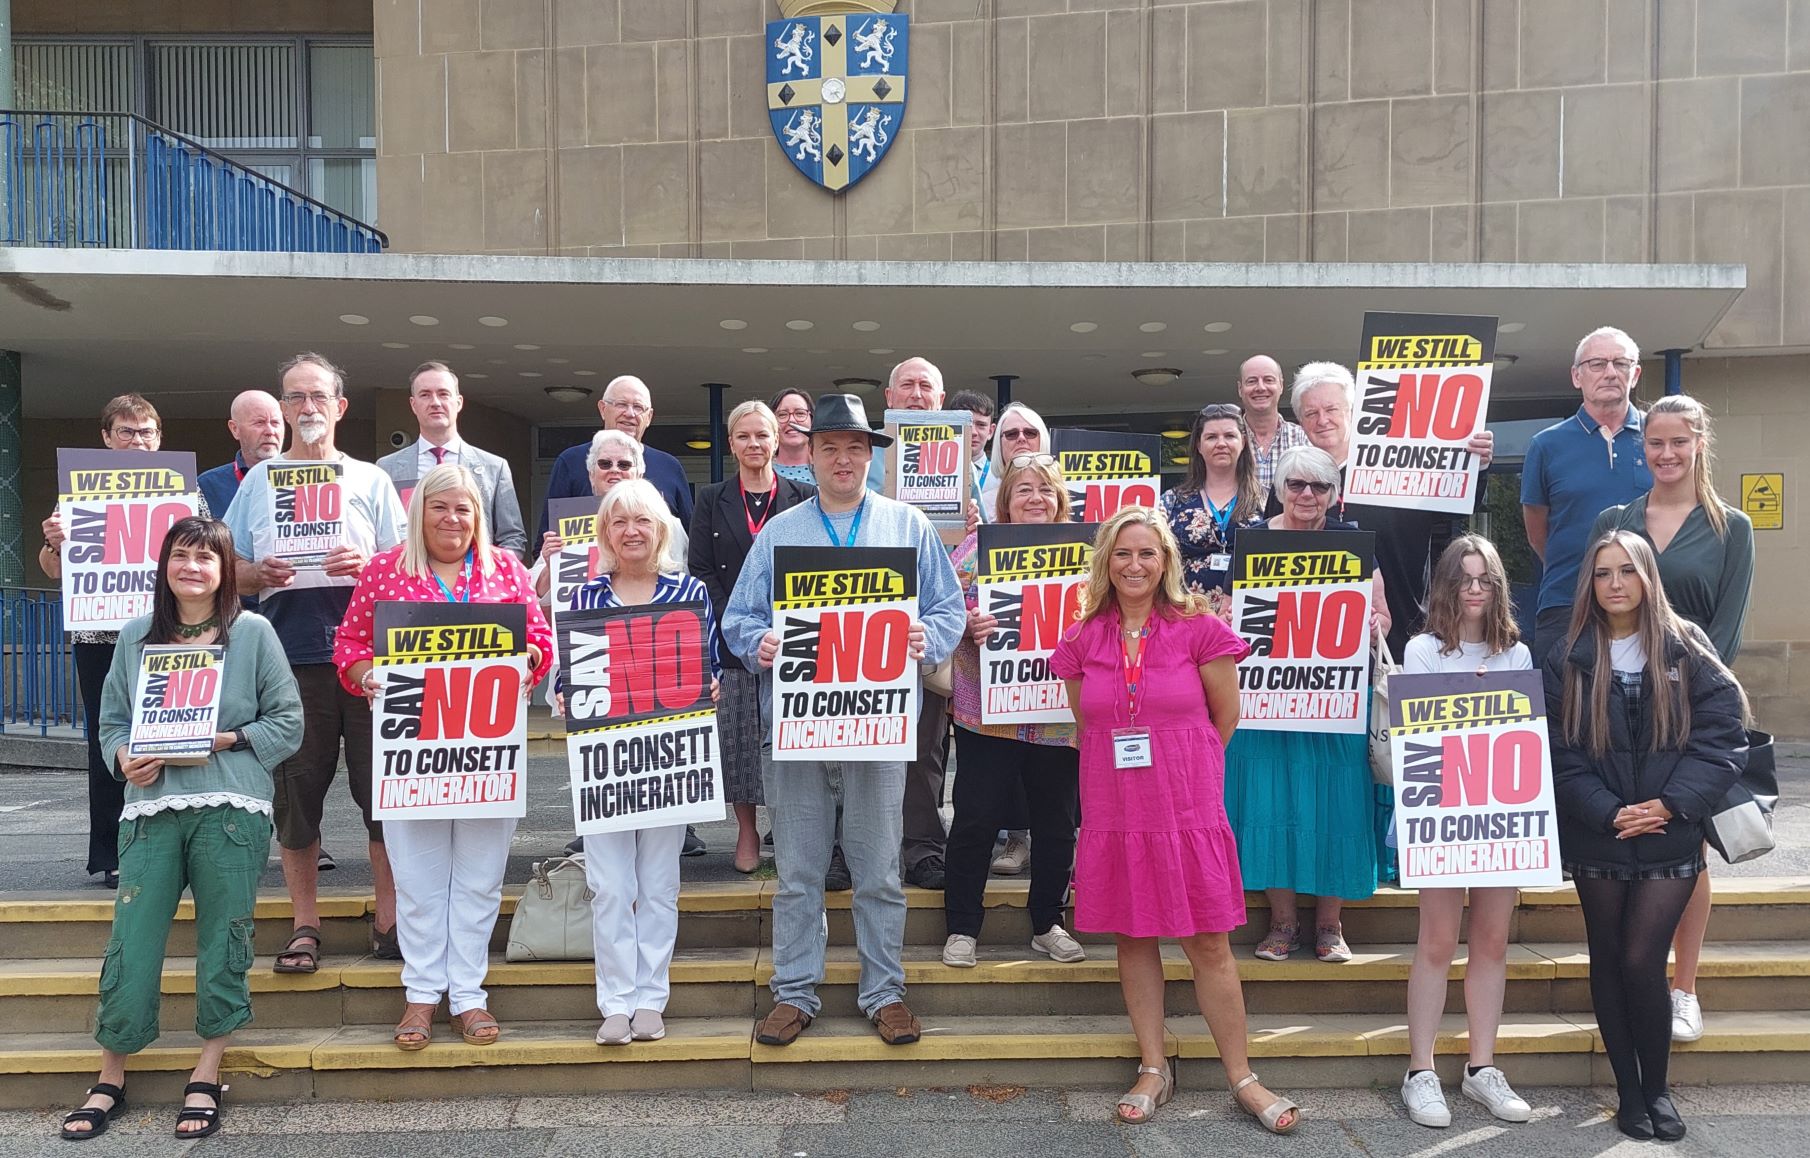 Objection to Consett incinerator at Durham County Hall